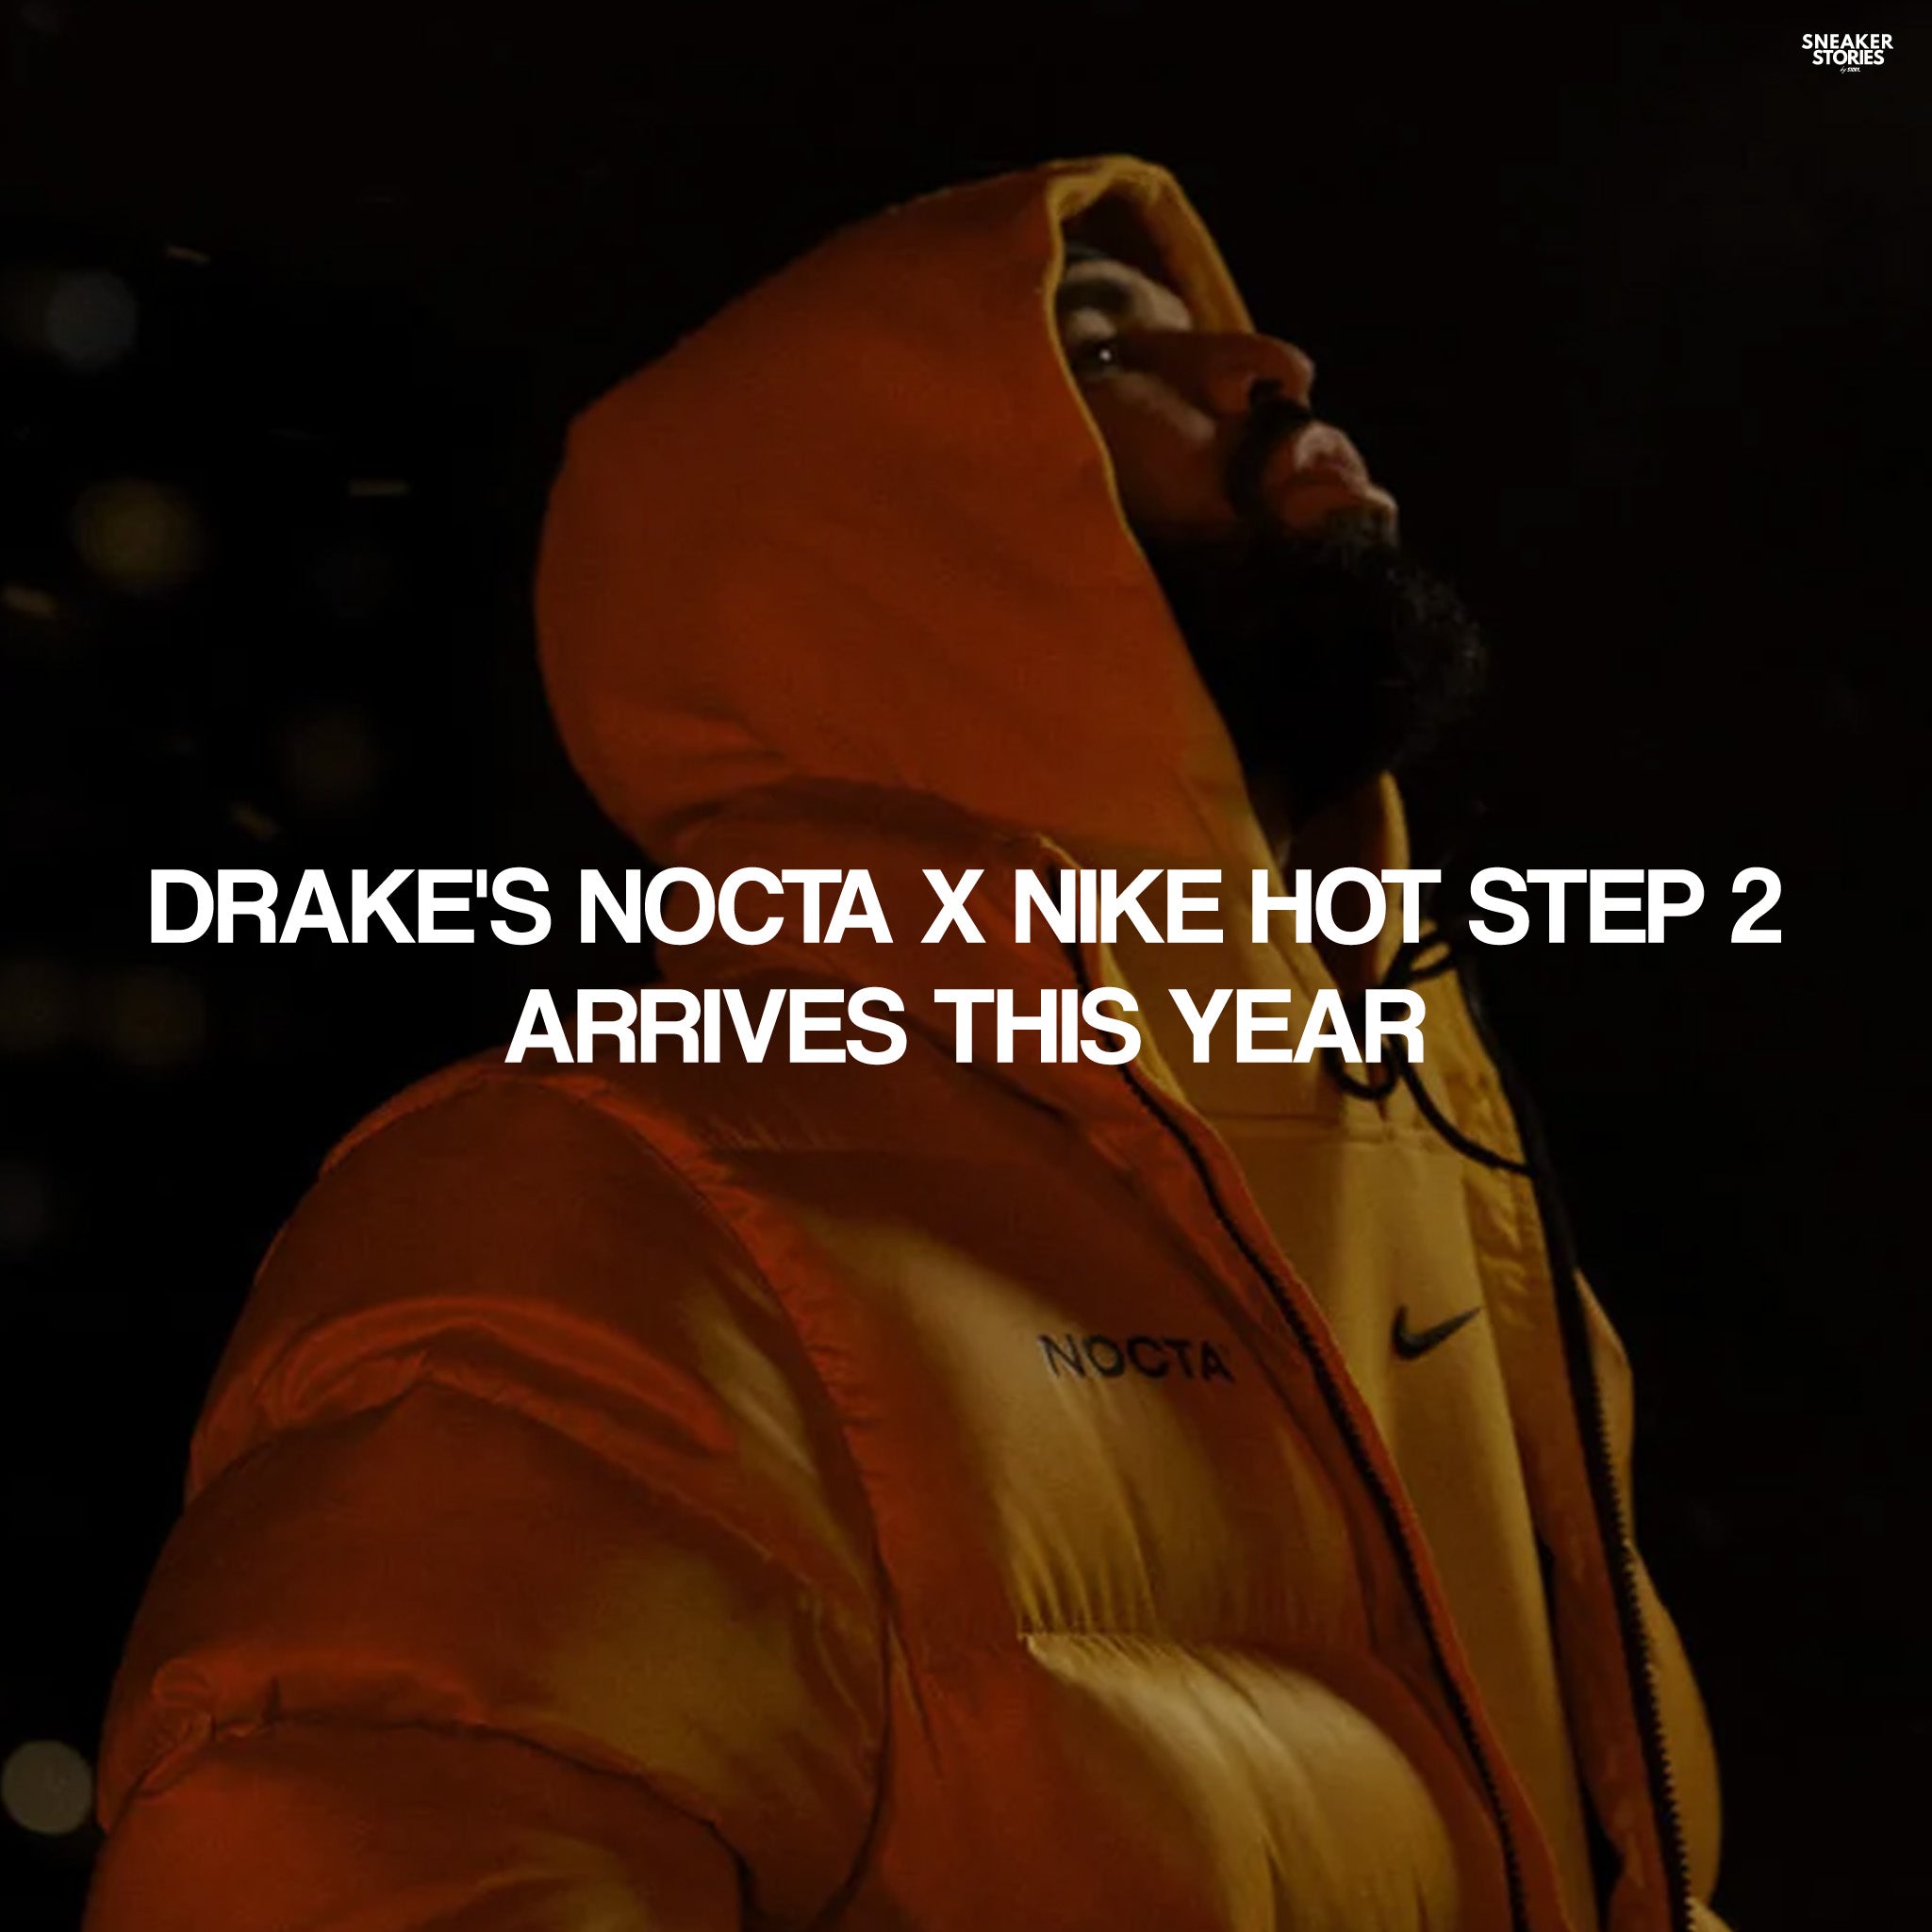 Drake's NOCTA x Nike Hot Step 2 Arrives This year